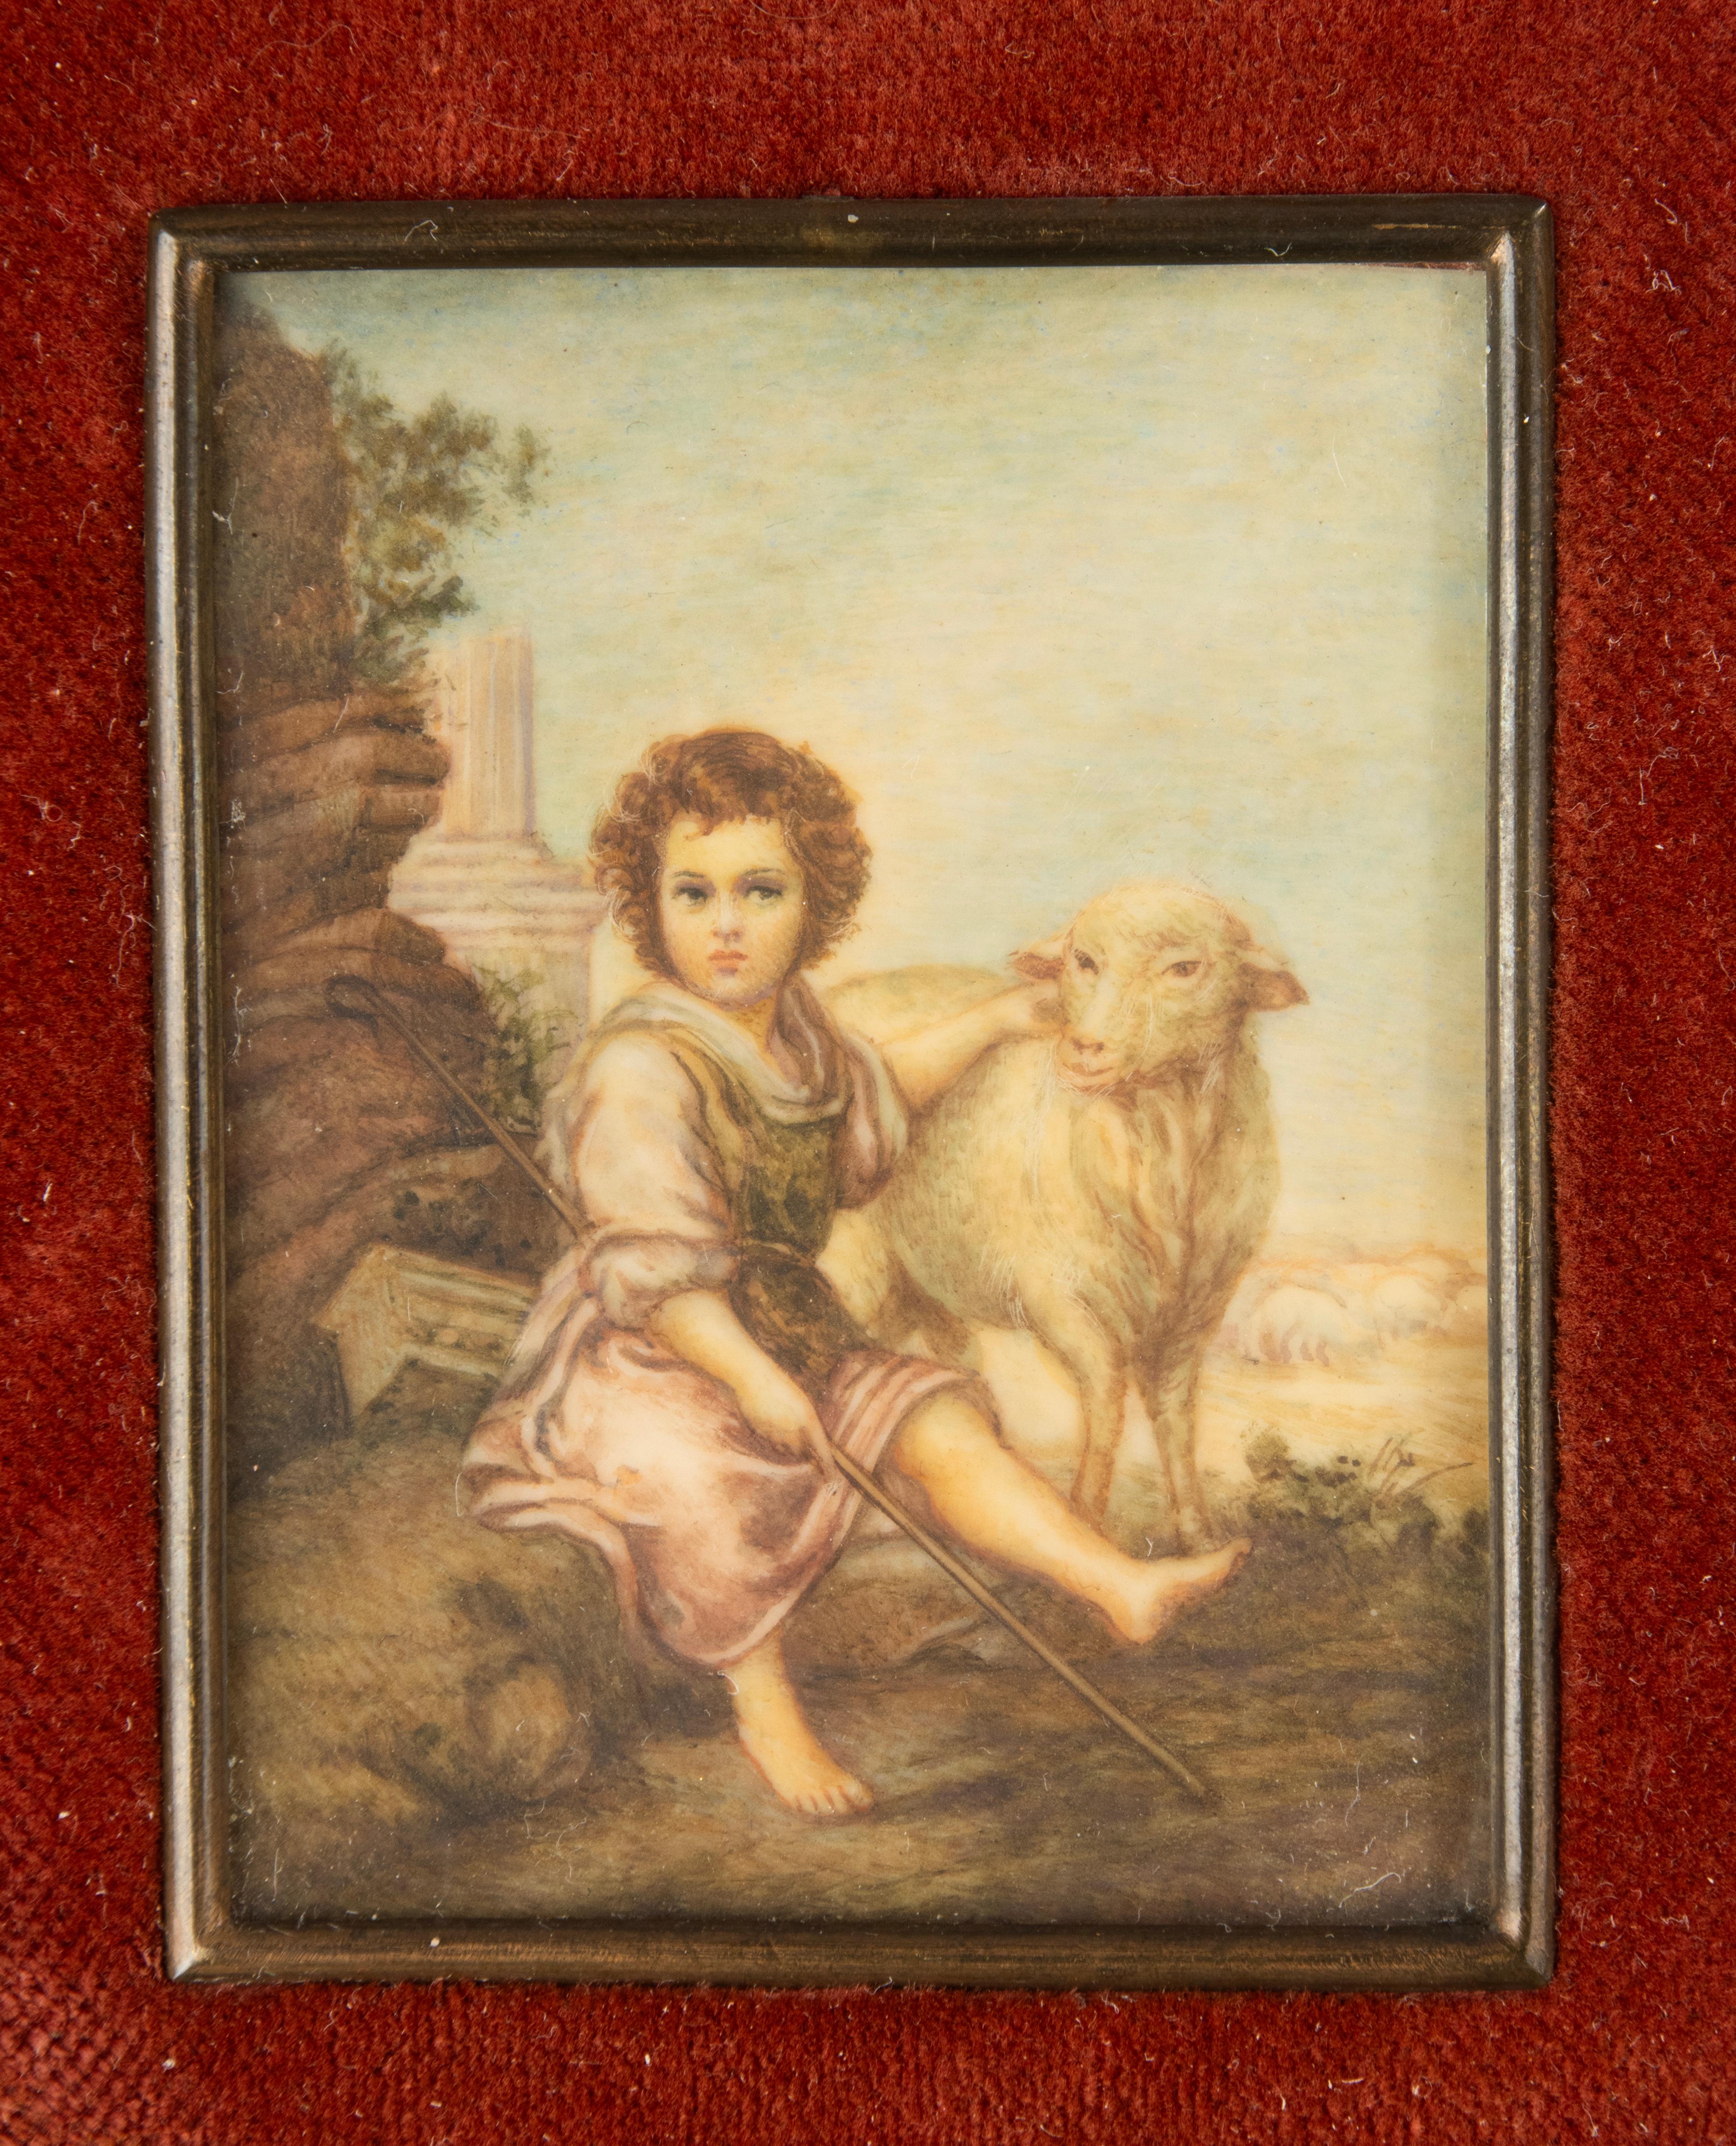 A lovely romantic miniature drawing / watercolor painting, depicting a young child with a sheep. 
Estimated date and origin: France, circa 1890-1900. 
The work is framed with a red velvet passe partout behind glass and a simple gold-colored wooden